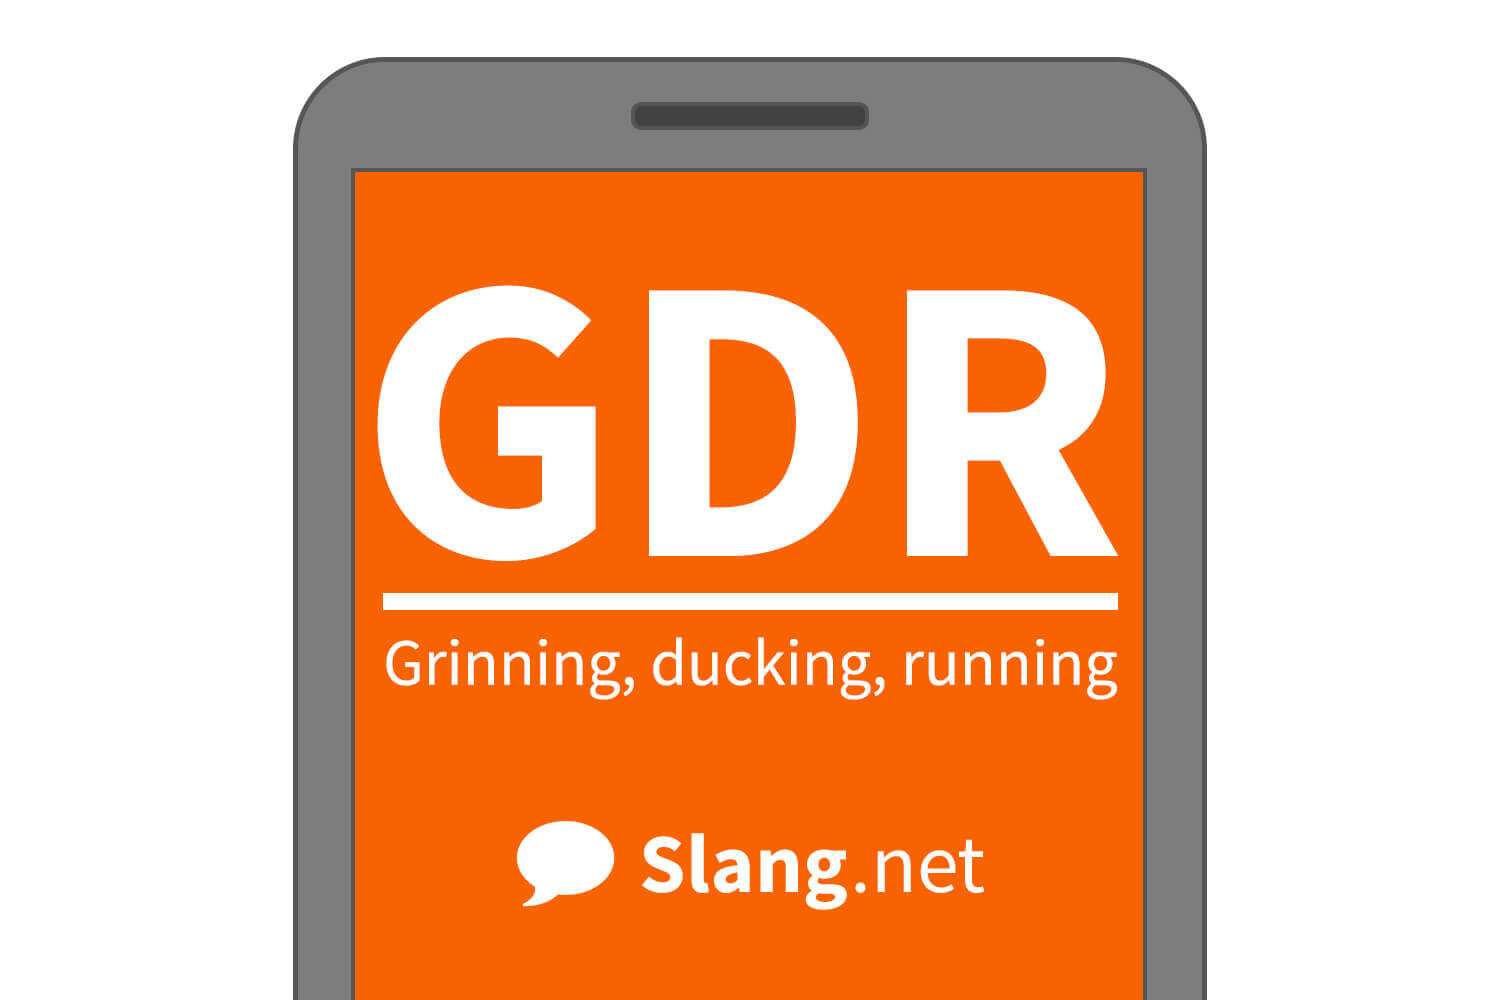 GDR means &quot;grinning, ducking, running&quot;